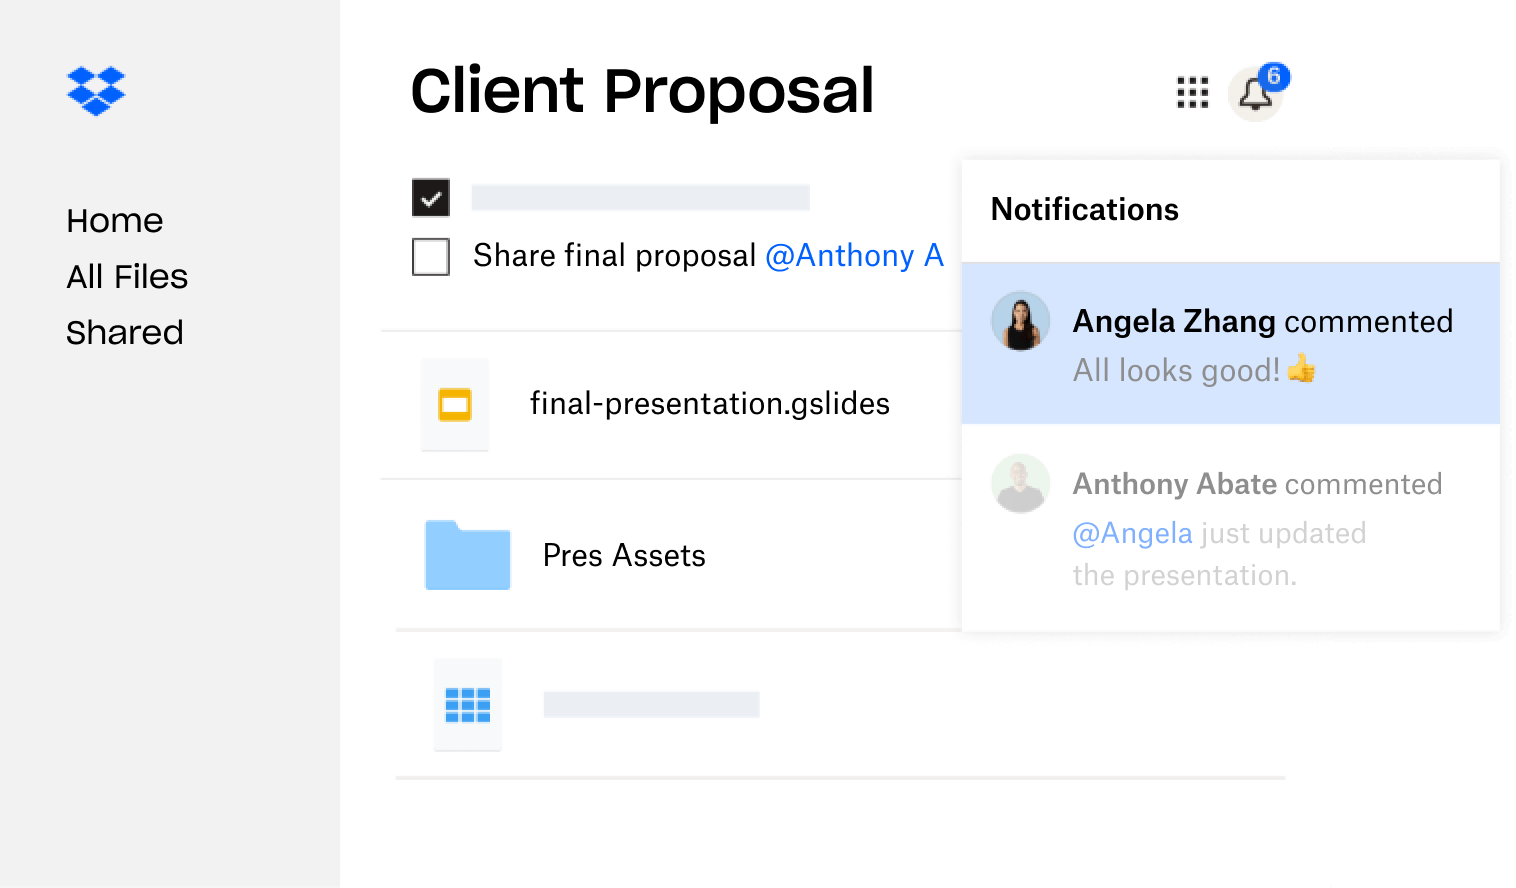 A client proposal created in Dropbox is shared with multiple users who have left feedback